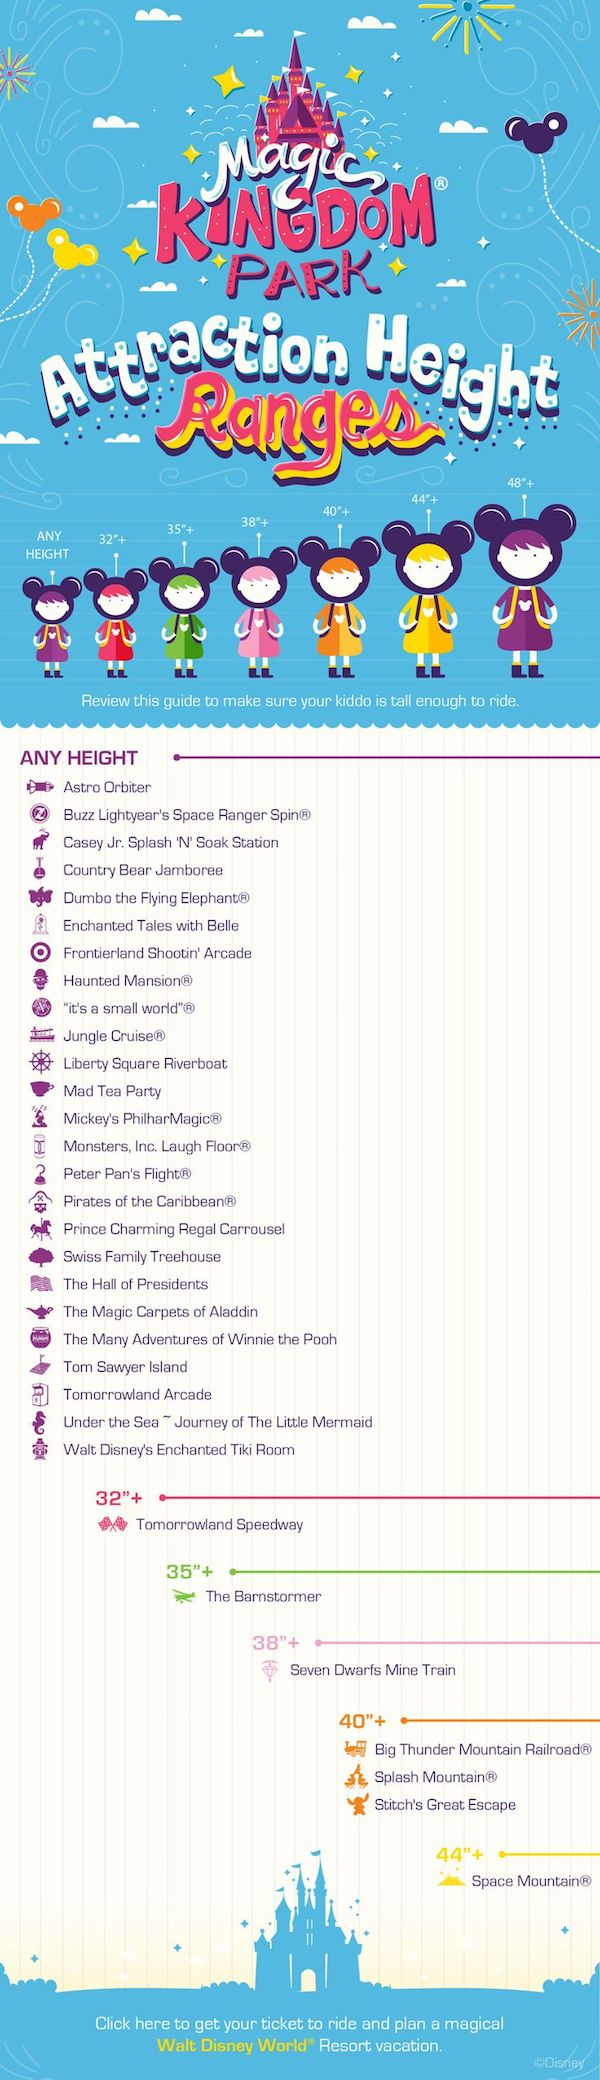 Disneykids: Height Requirements For Attractions At Walt